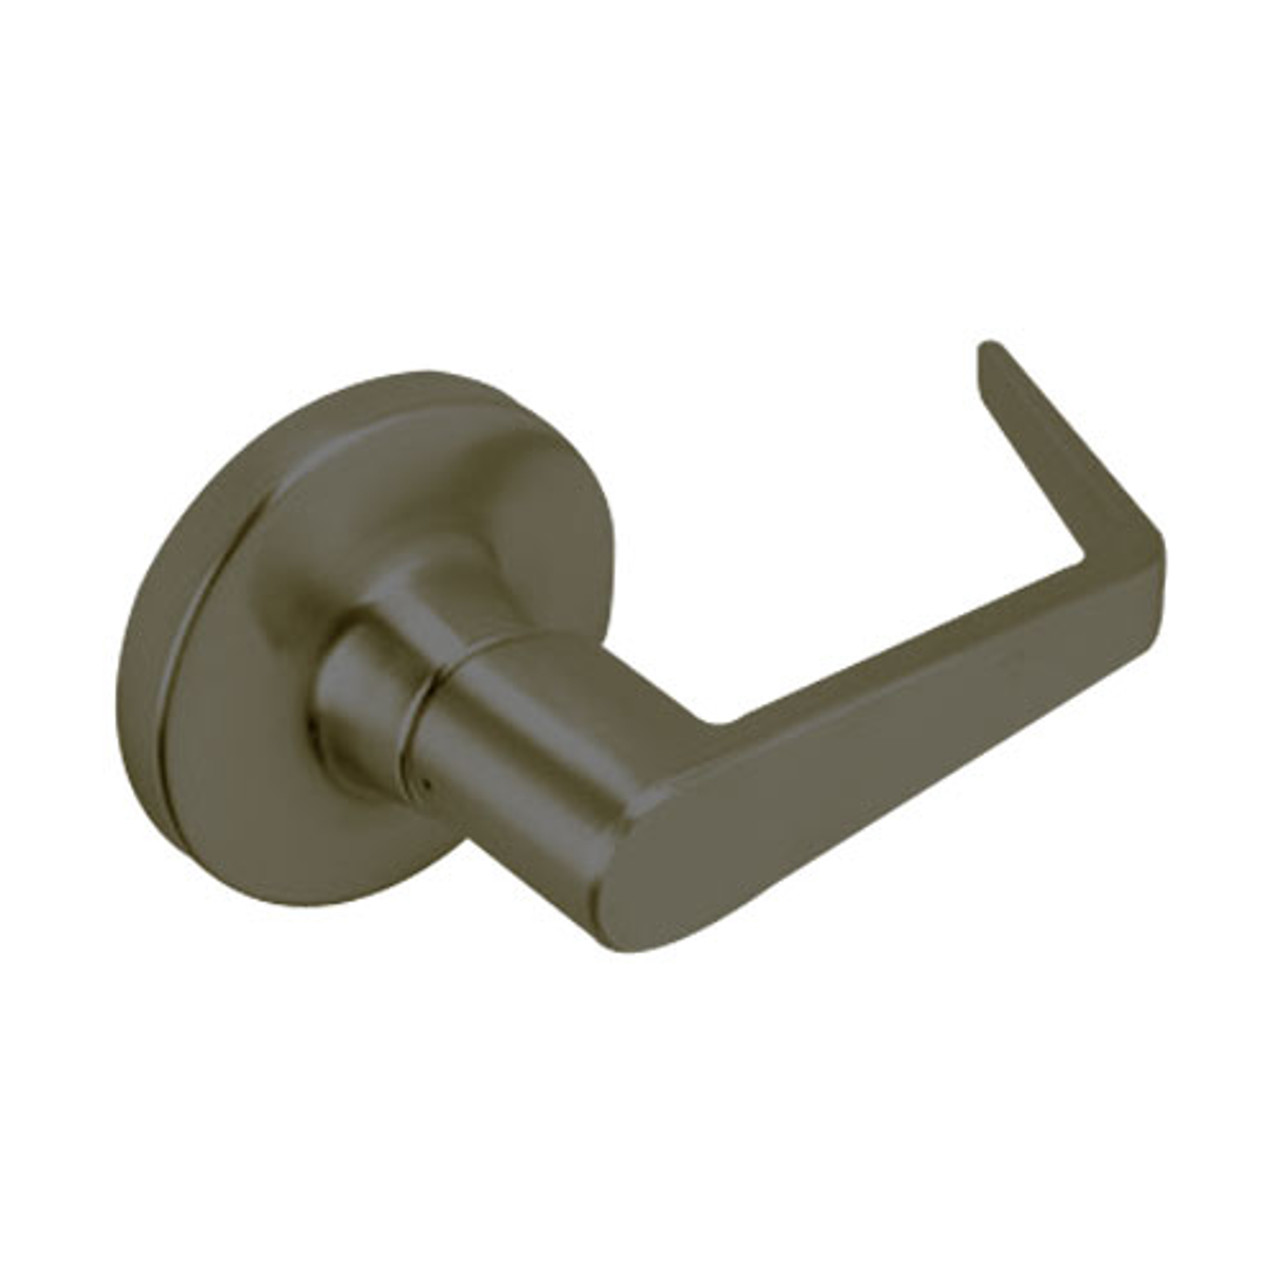 MA161-DG-613 Falcon Mortise Locks MA Series Exit/Connecting with DG Lever in Oil Rubbed Bronze Finish